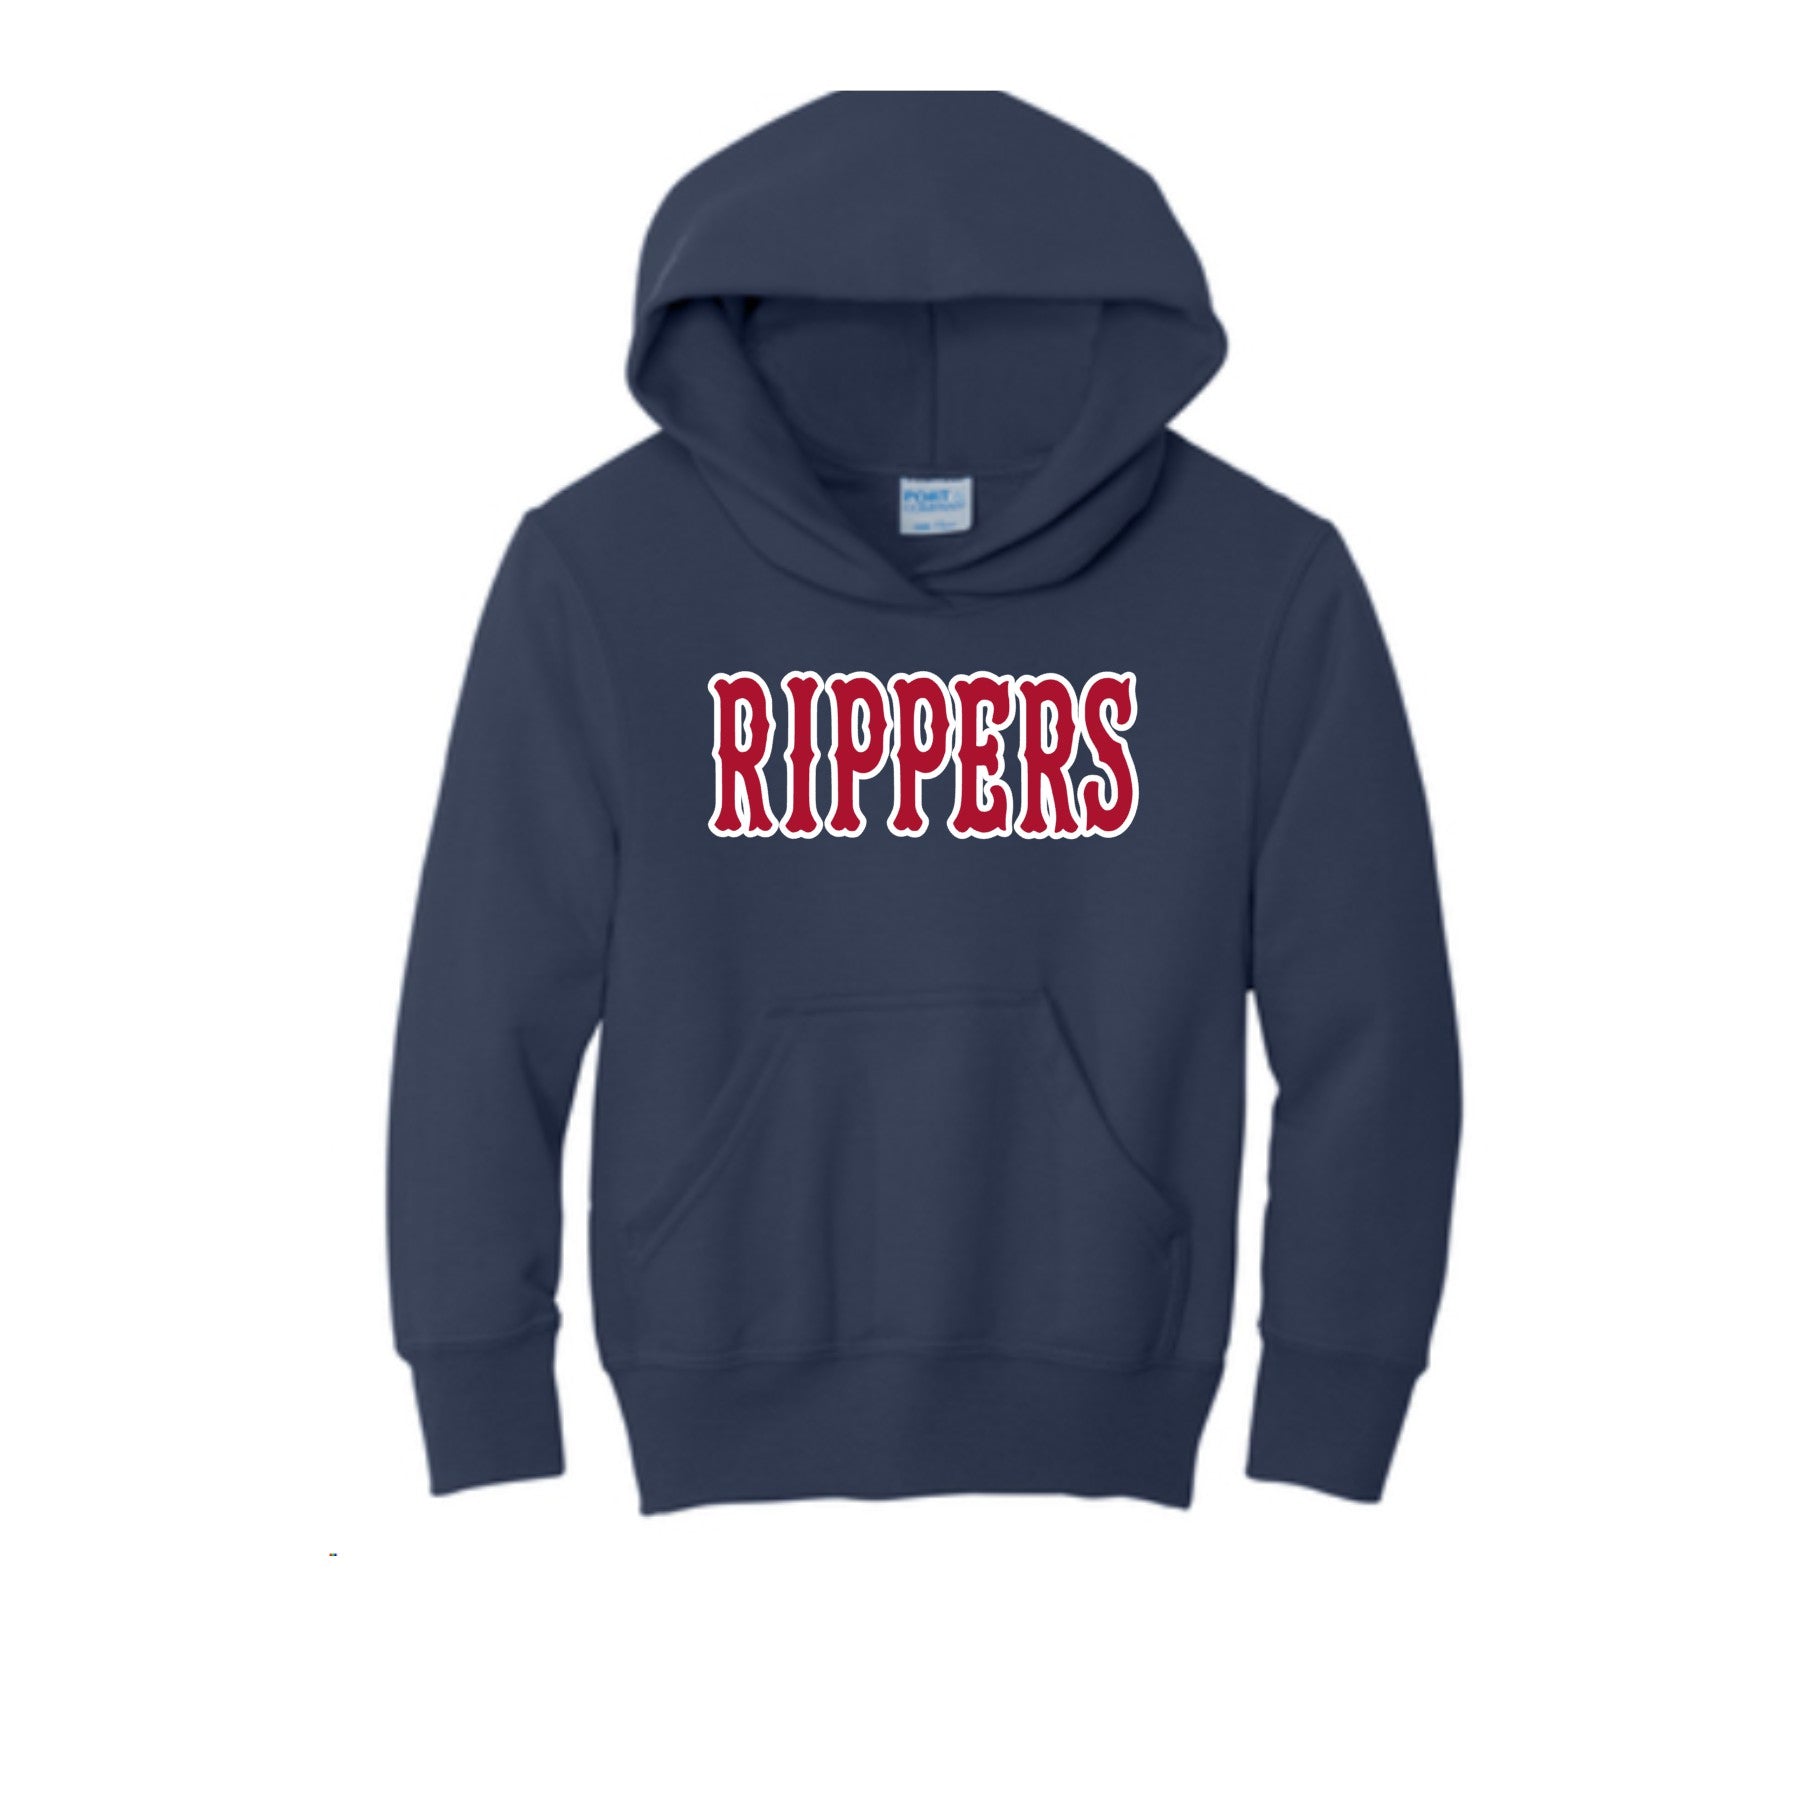 Rippers Baseball Navy Hoodie - Port and Co